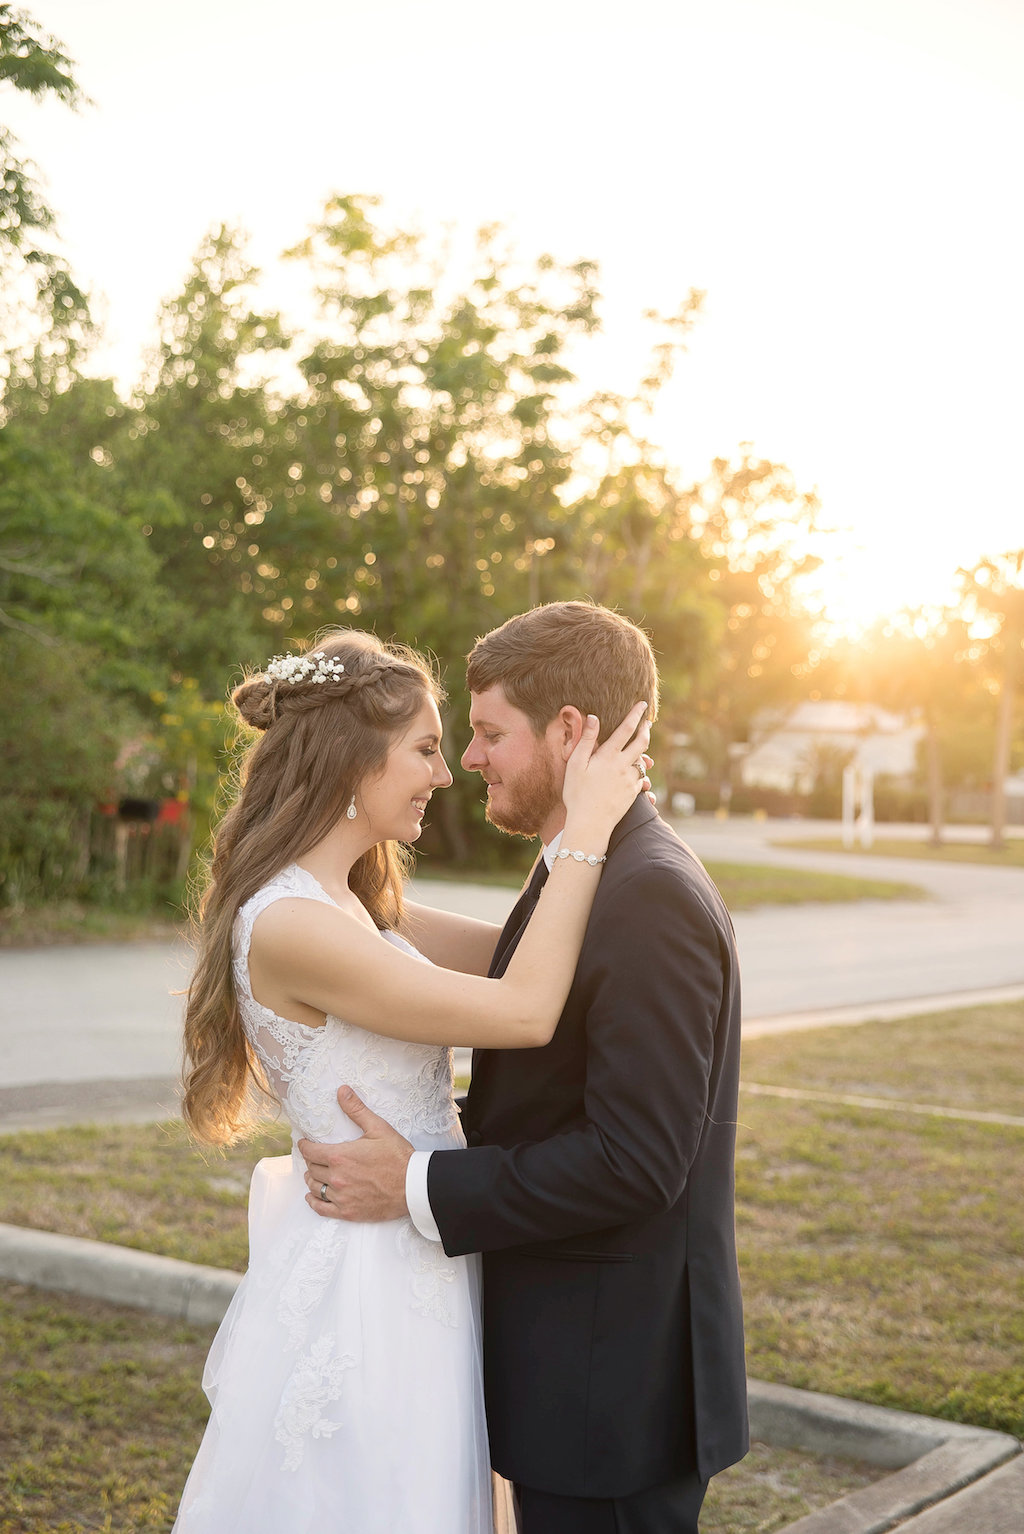 Outdoor Sunset Bride and Groom Wedding Portrait, Bride in A-Line Lace and Cap Sleeve Wedding Dress, Groom in Navy Blue Suit | Tampa Bay Photographer Kristen Marie Photography